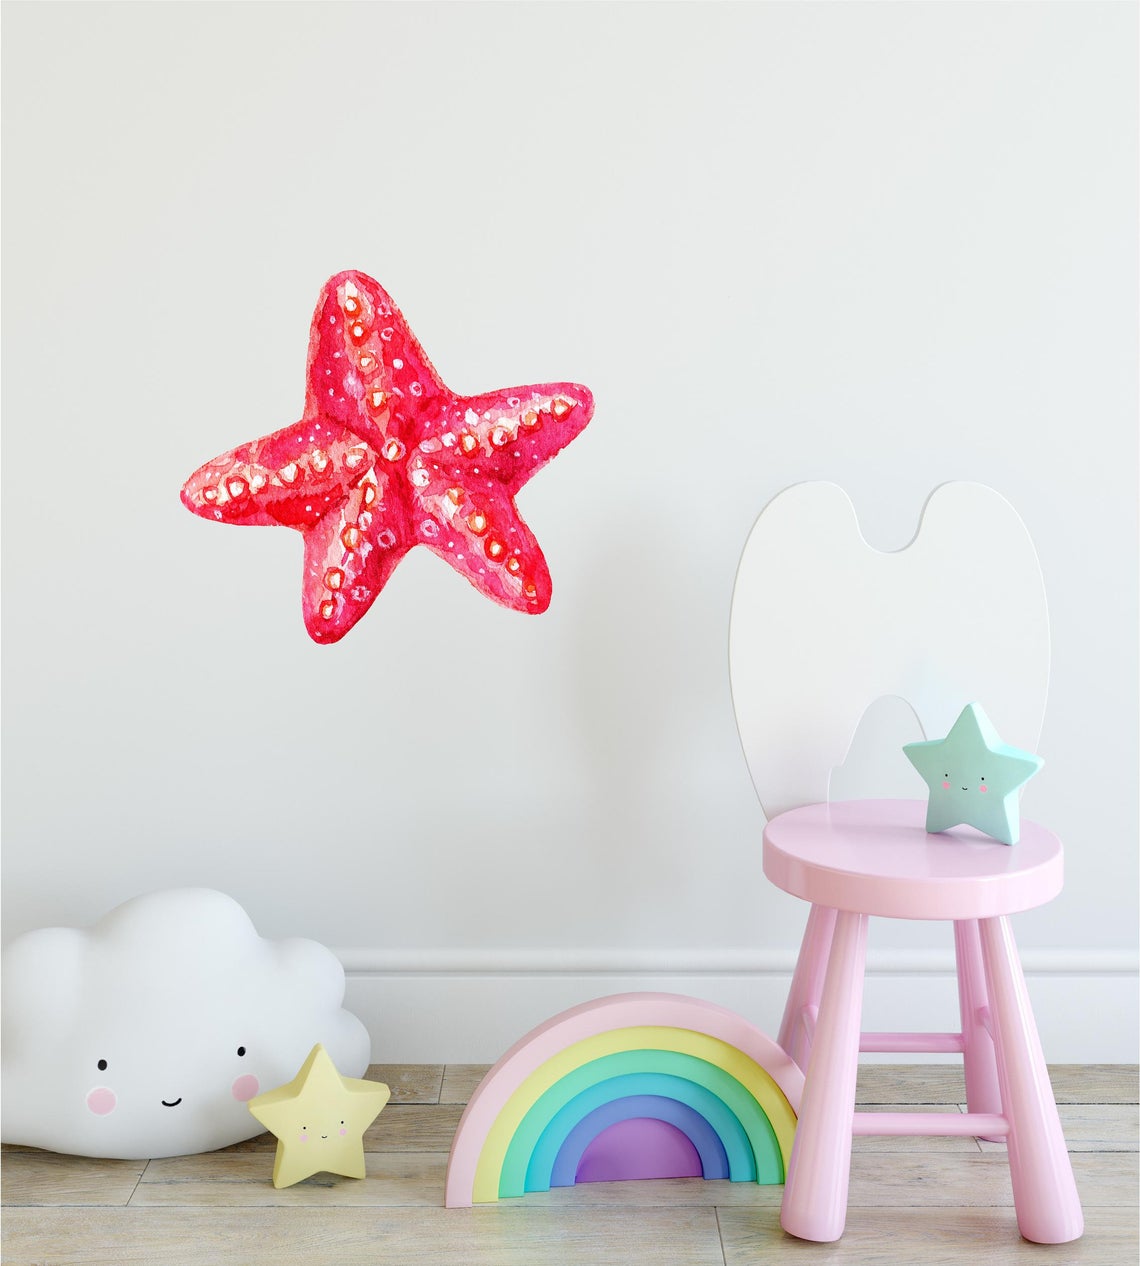 Watercolor Starfish Wall Decal Removable Red Sea Star Wall Sticker | DecalBaby